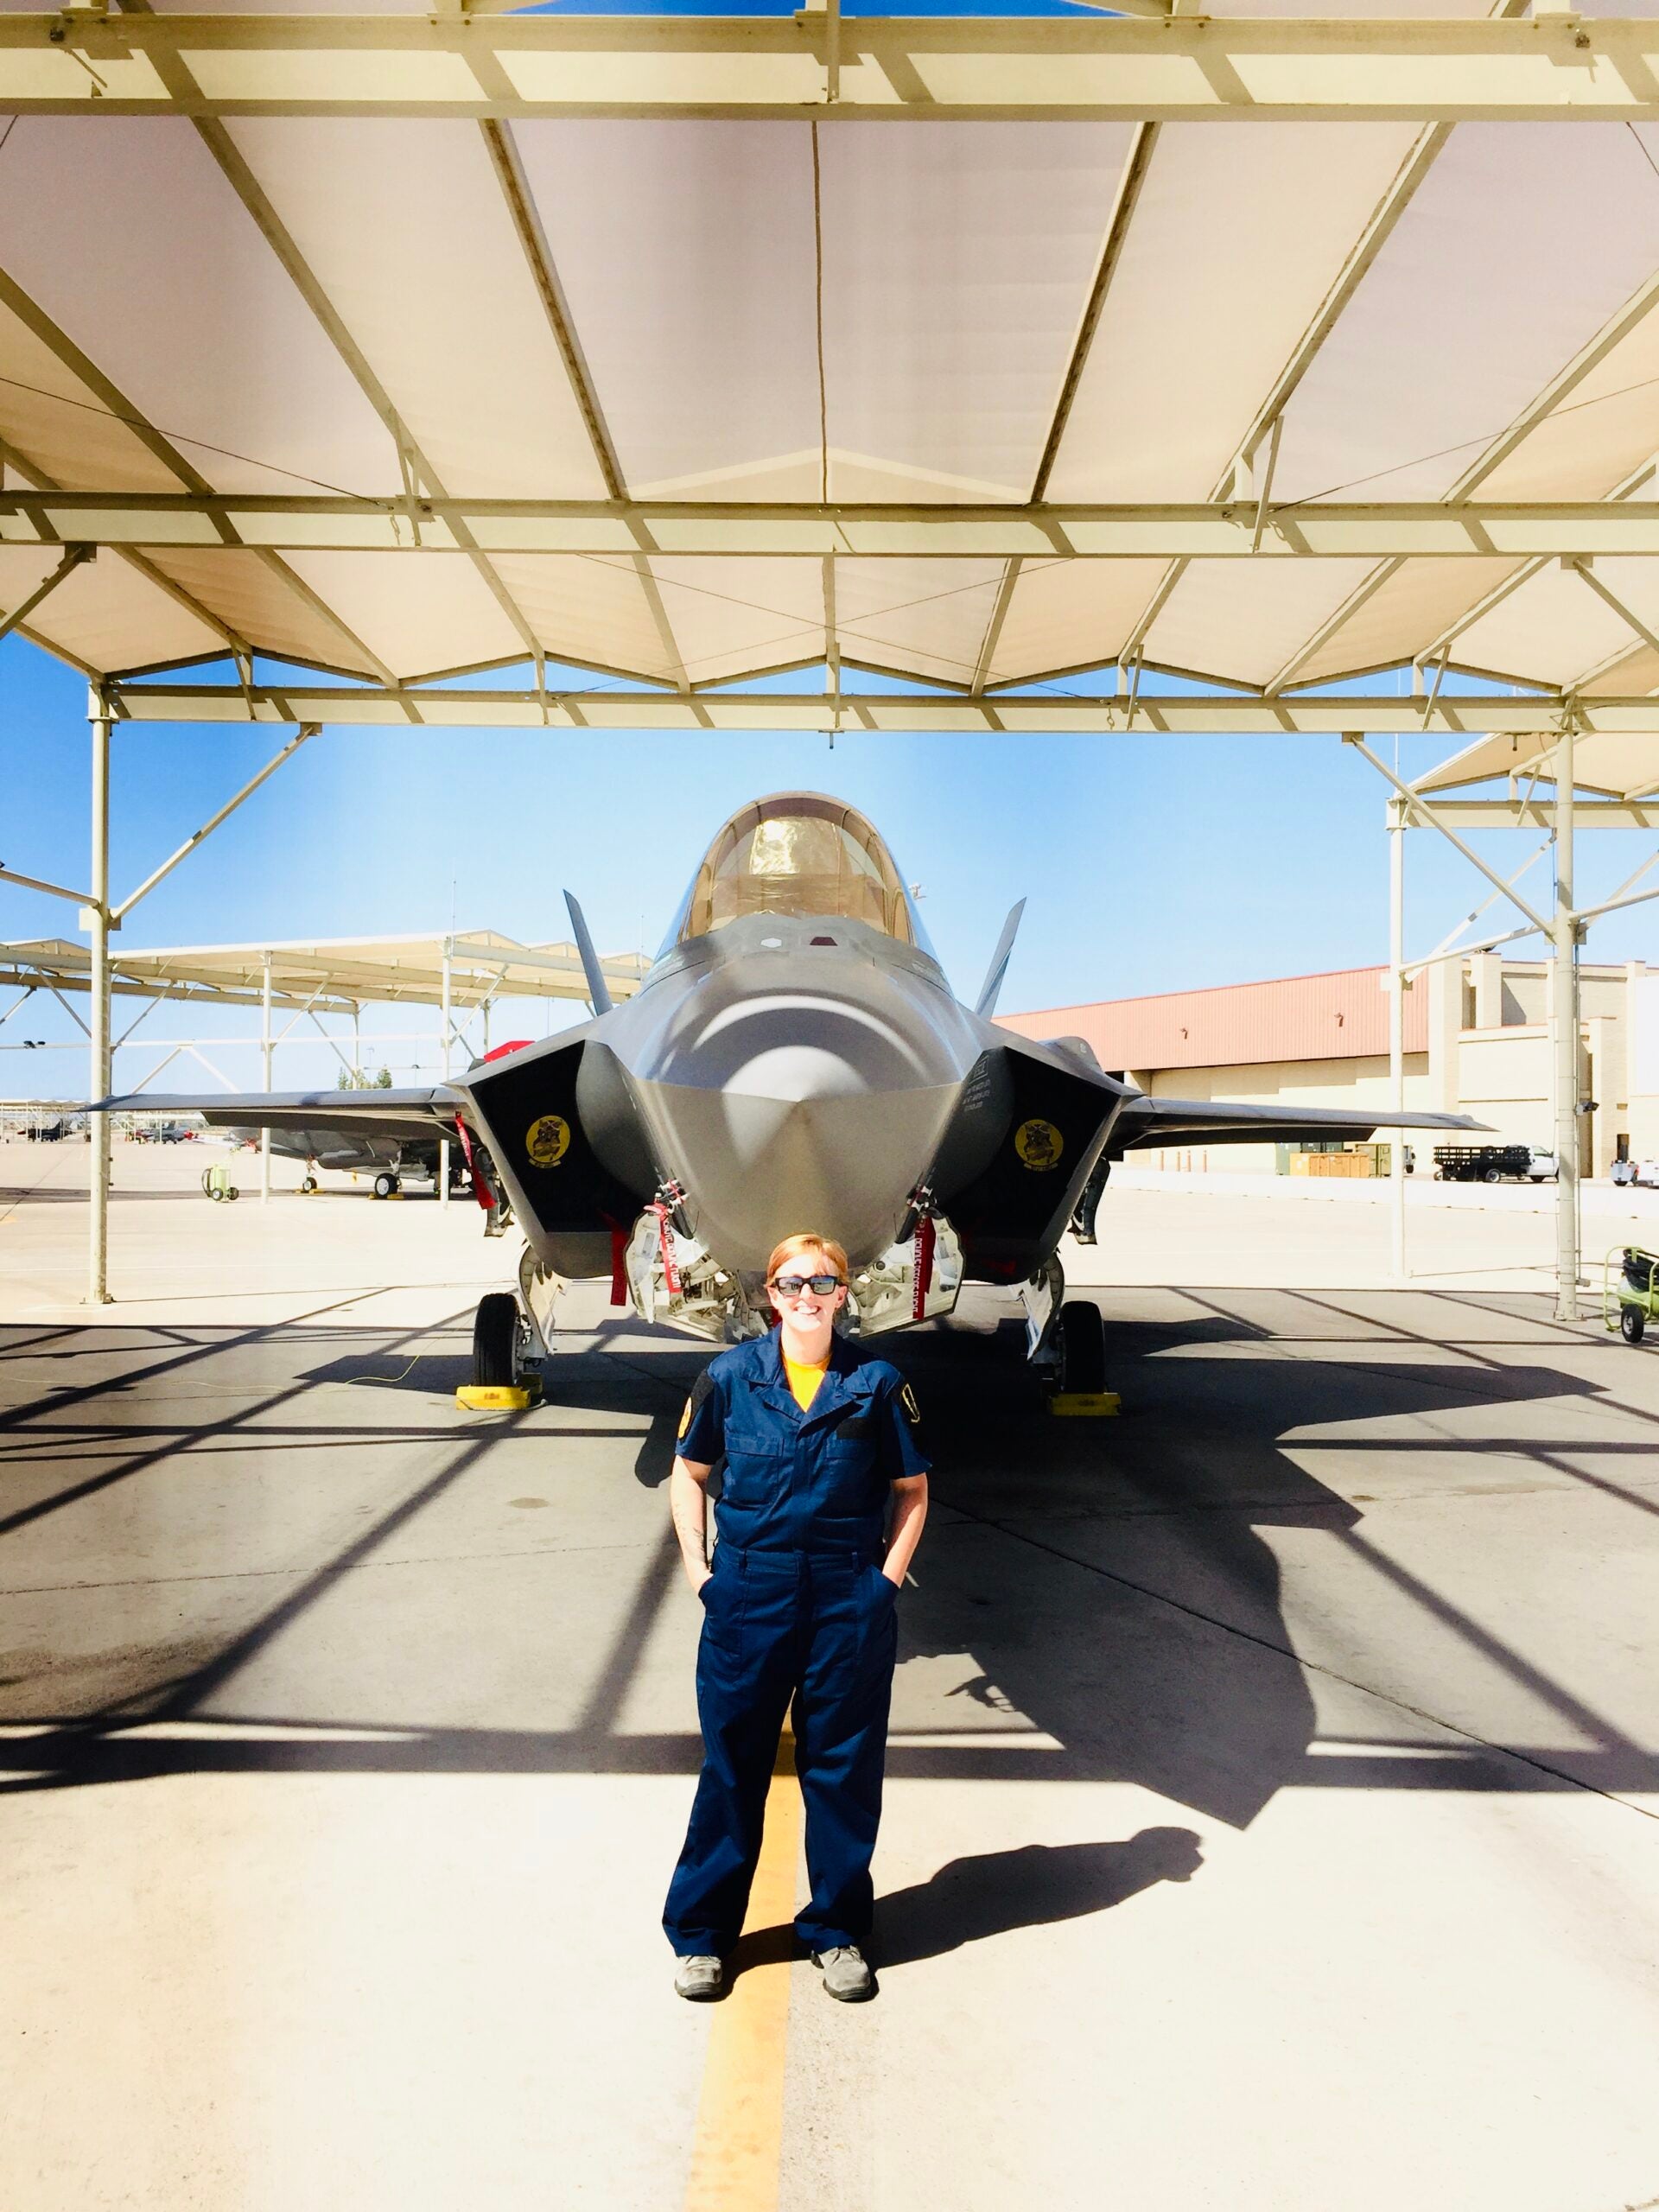 Air Force F-35 maintainer Leah Curtin poses with an F-35 at Luke Air Force Base, Arizona in 2016. (Photo Courtesy Master Sgt. Leah Curtin)